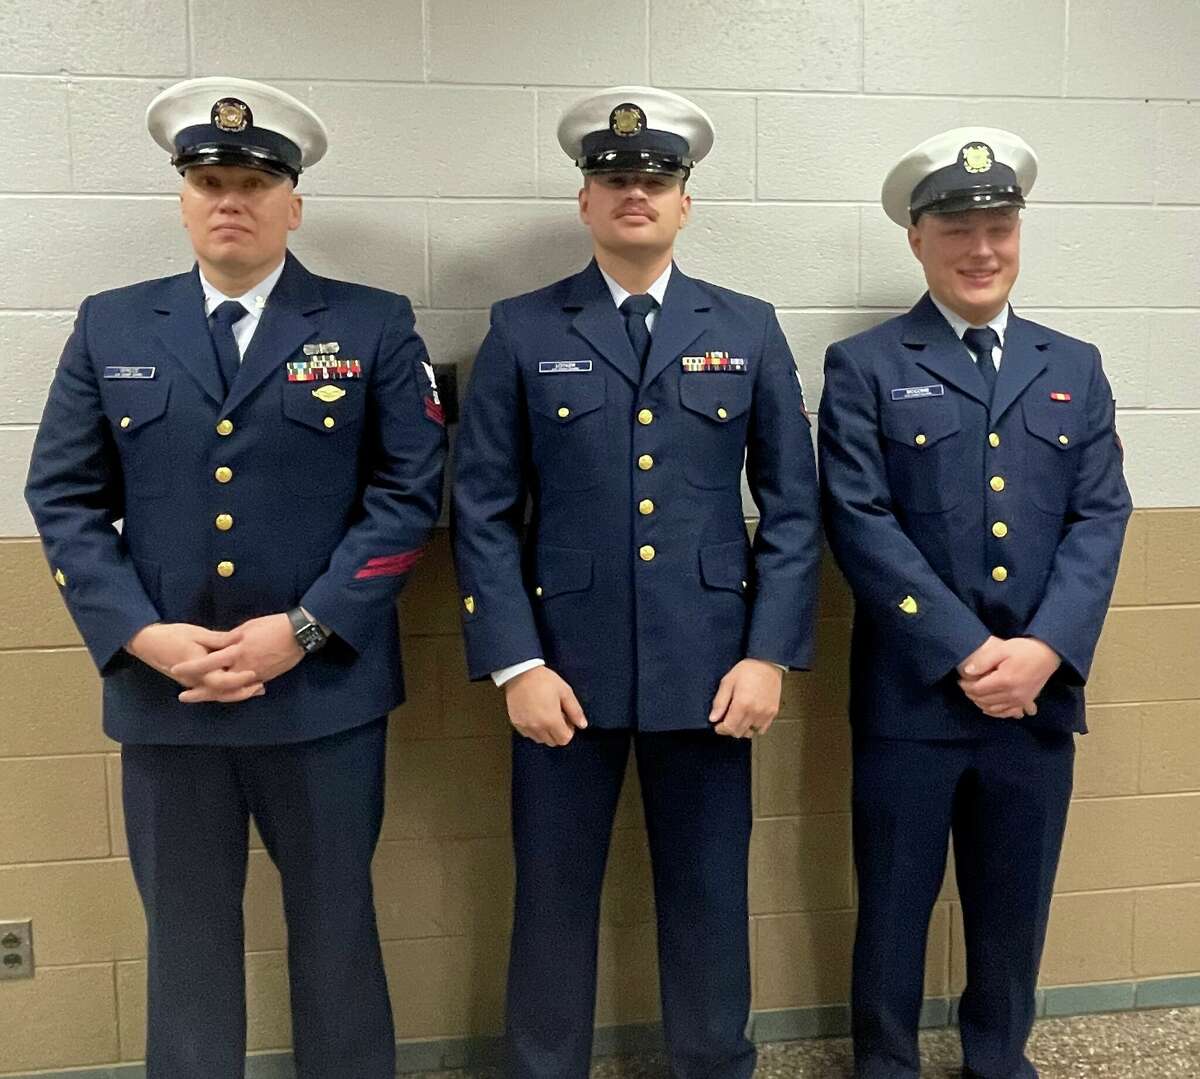 From left, U.S. Coast Guard Officers Spruce, Lotker and McComb were welcomed guests at Manistee Catholic Central in January.